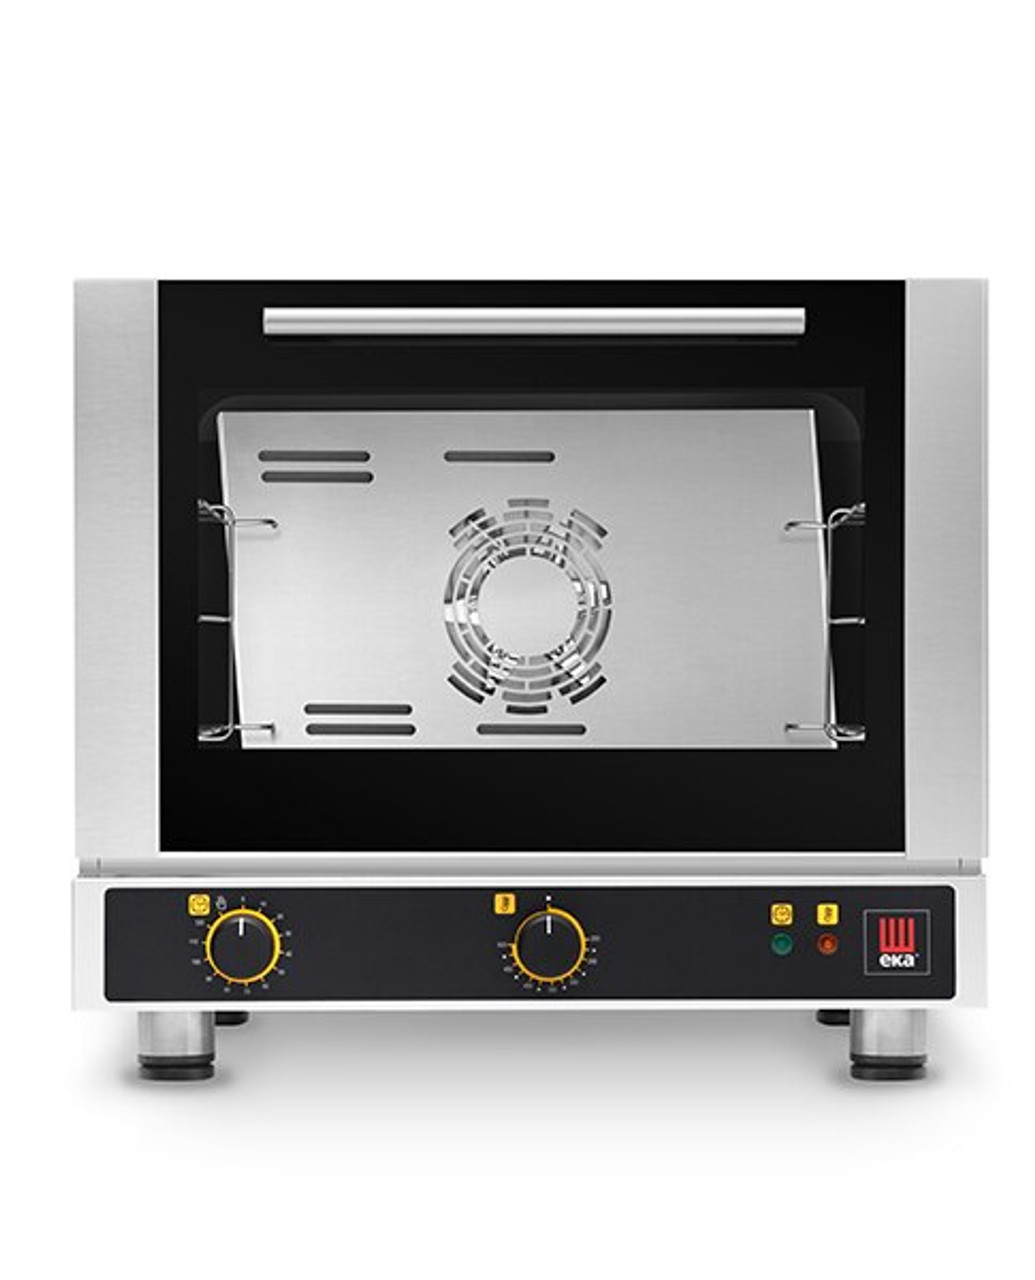 Eka 3-tray, half-size (13x18) convection oven with electro-mechanical control.  Stainless steel construction.  Top-opening (bottom-hinged) door.  Operates on 208v (120v is available at EKFA312-S1).  Three 13" x 18" grids included.